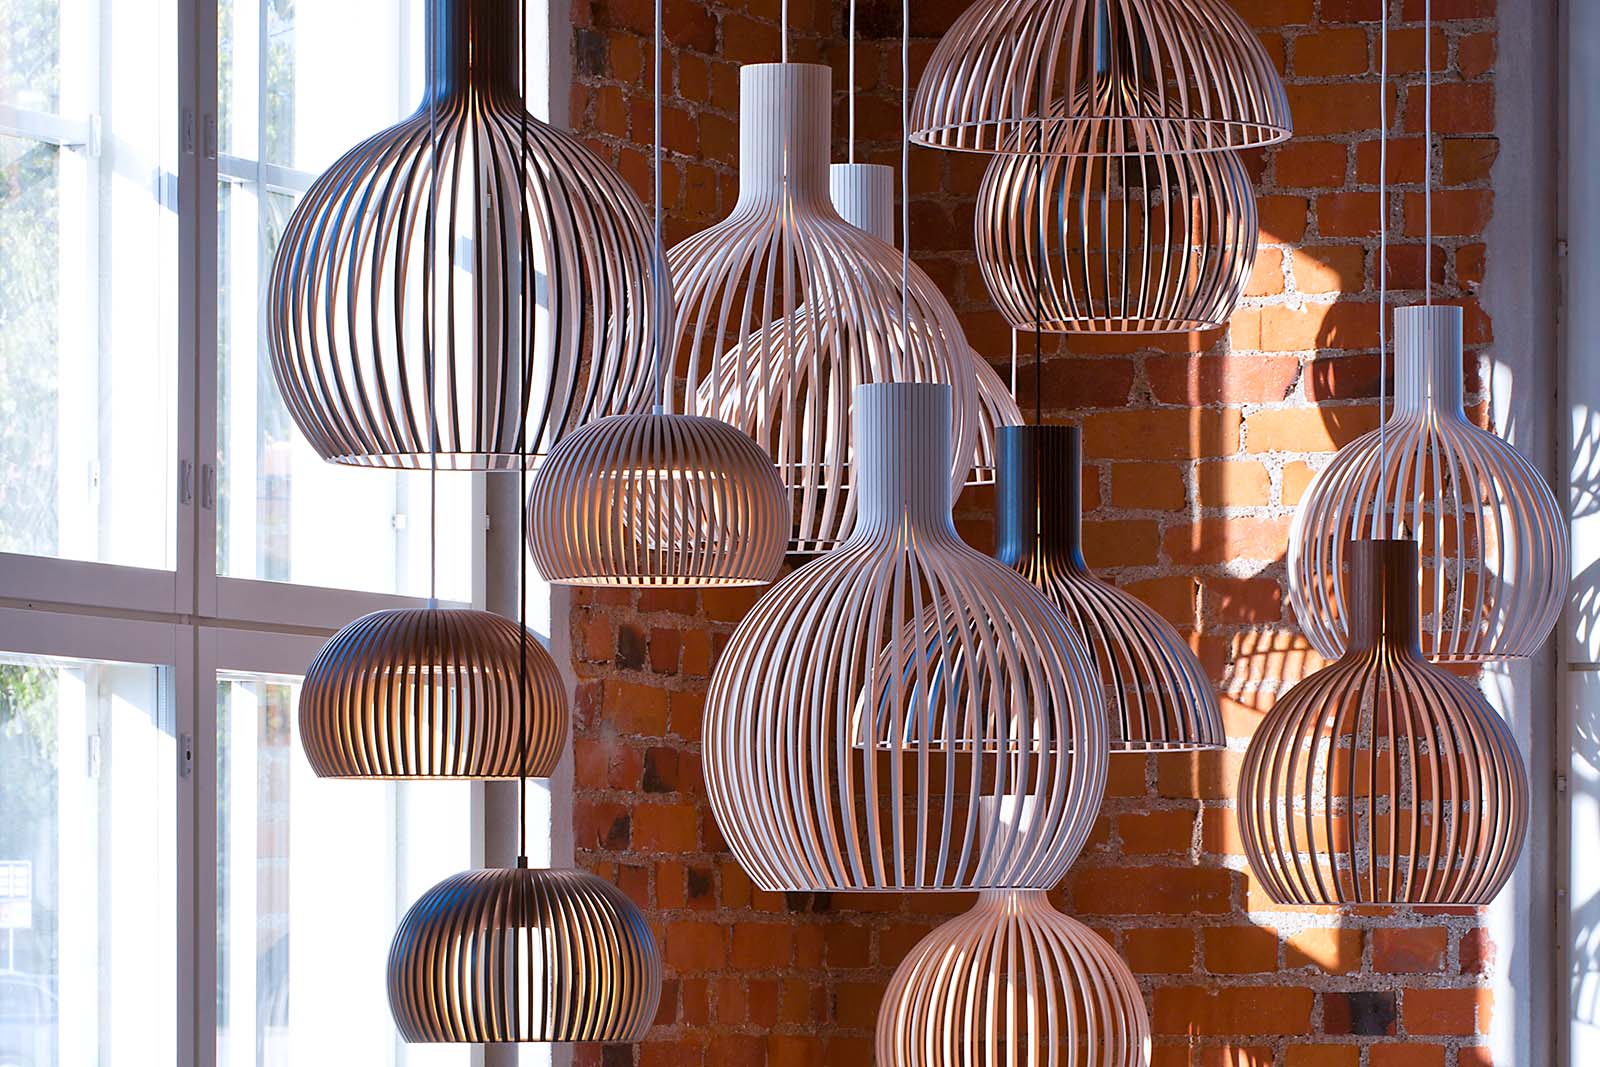 A collection of Octo-, Victo- and Atto pendant lamps in various colors and finishes.